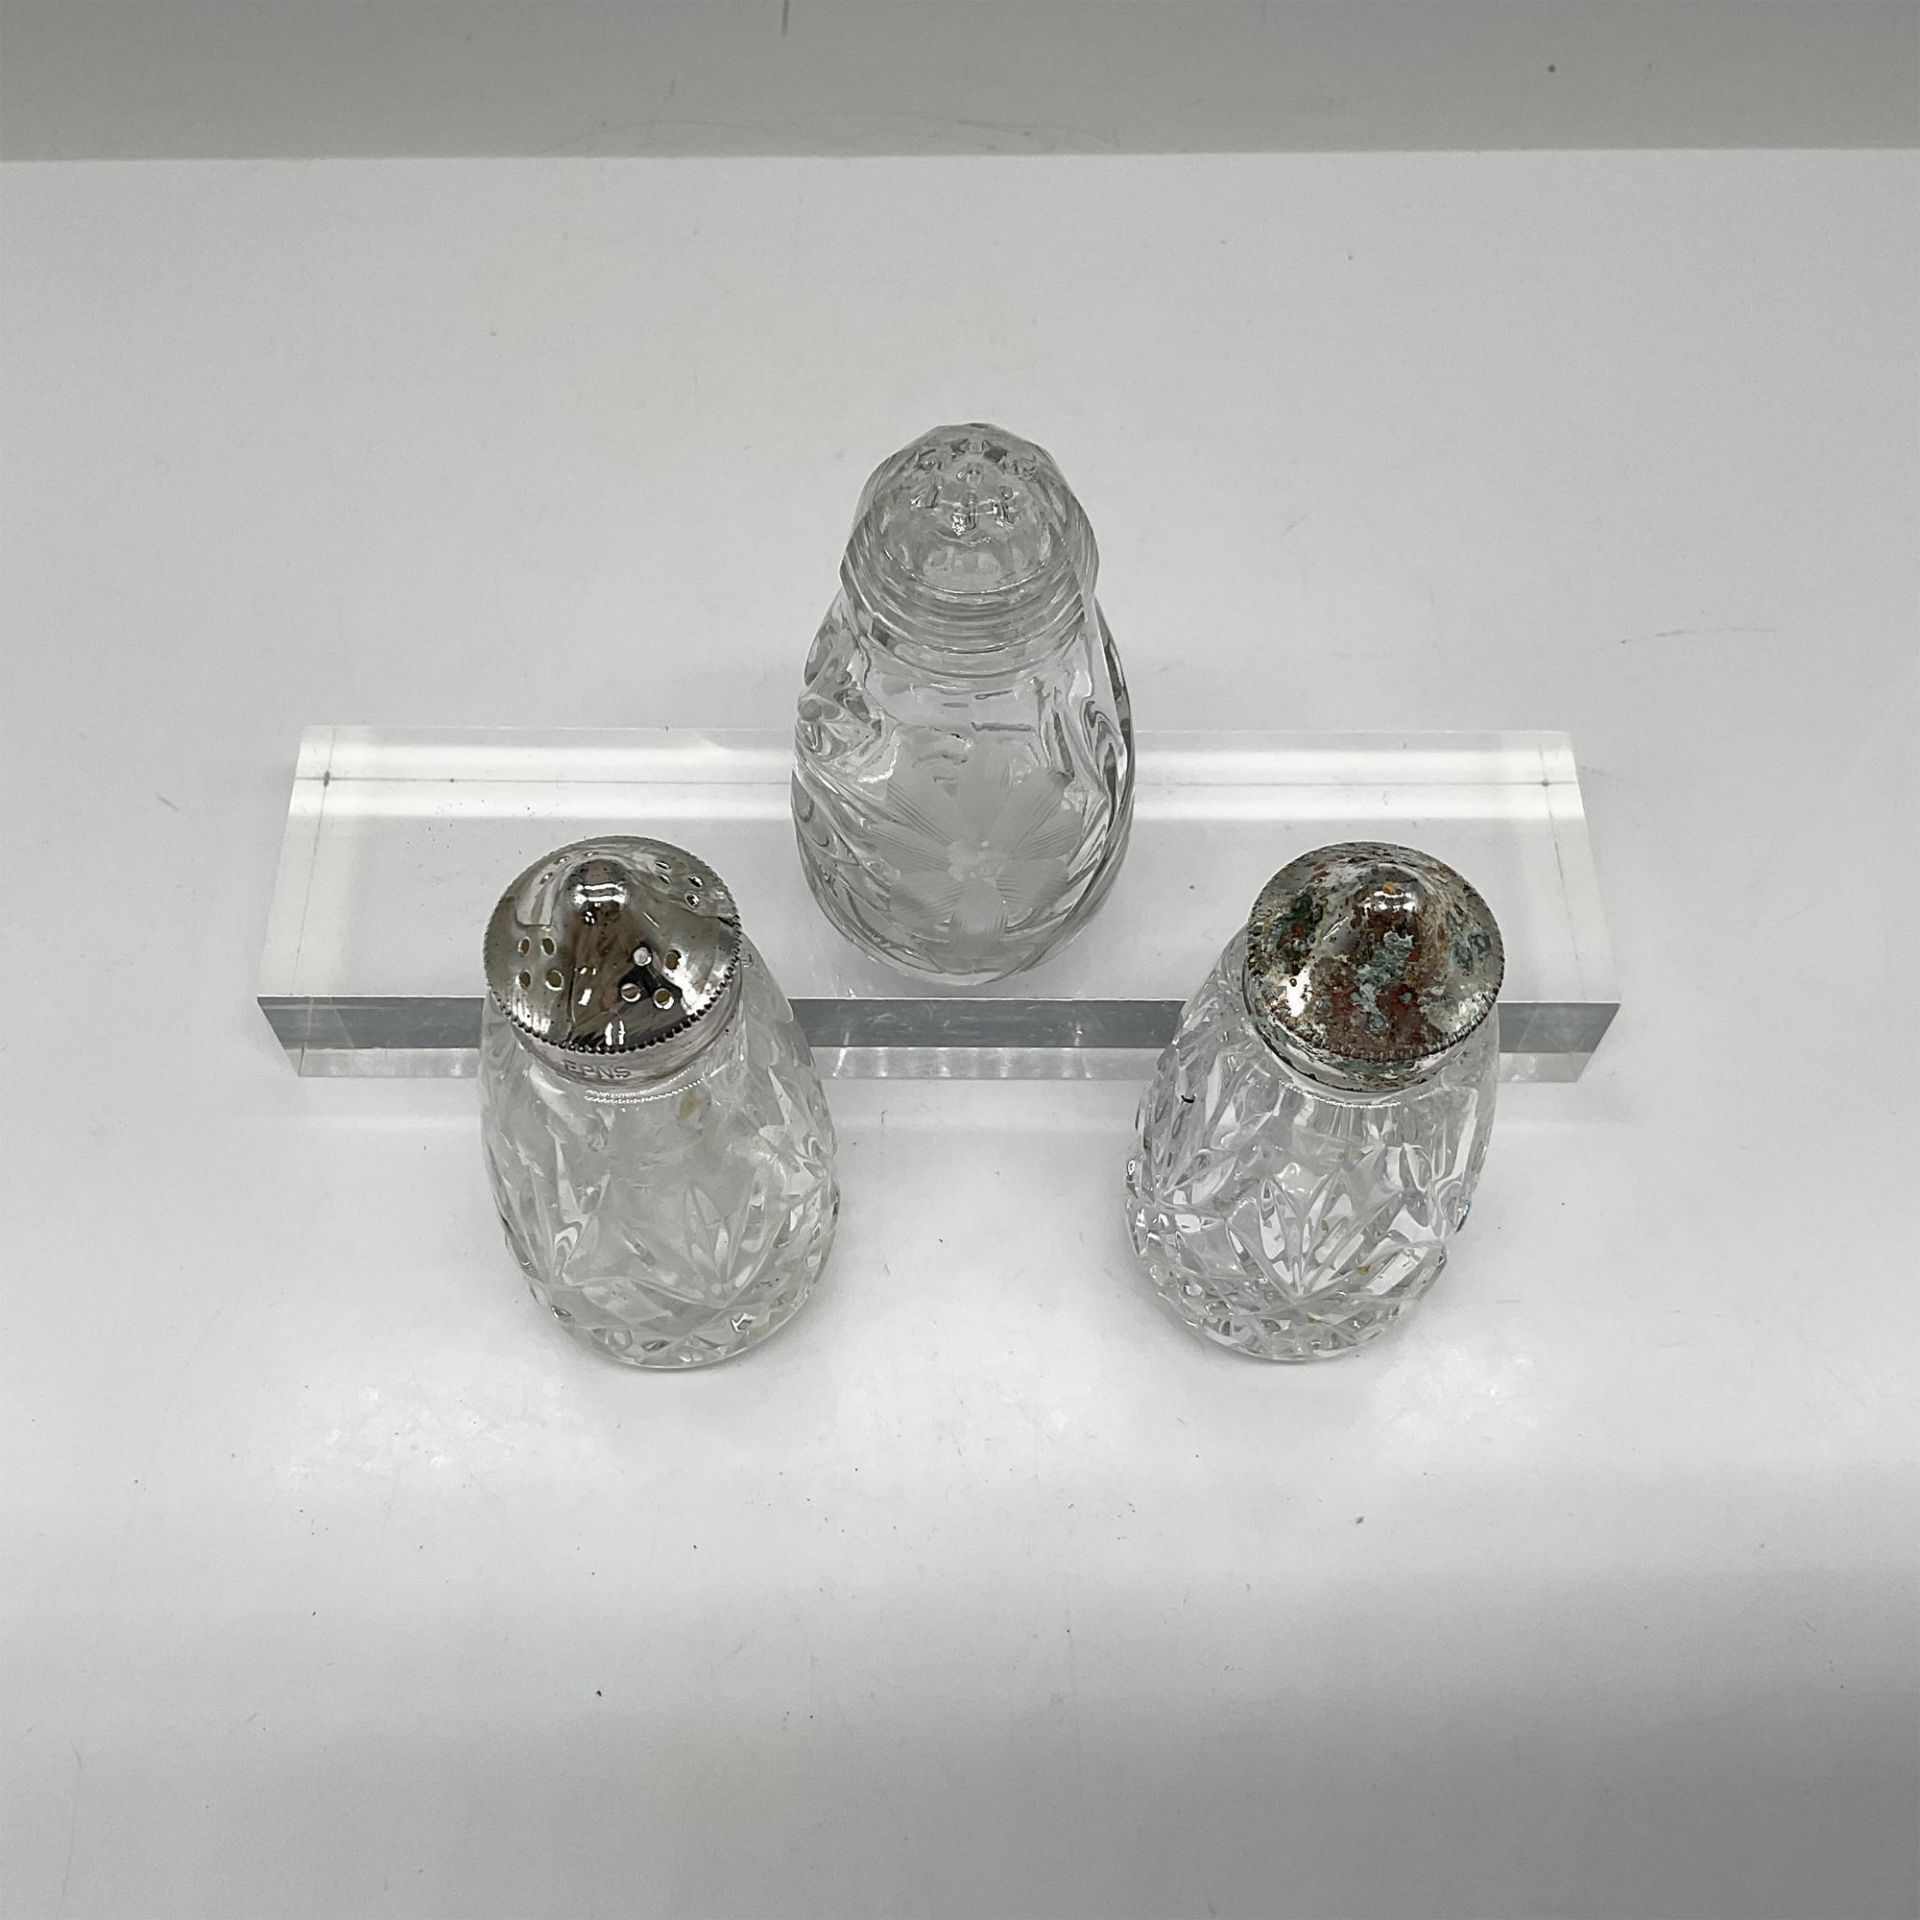 3pc Glass and Silver Shaker Set - Image 2 of 2